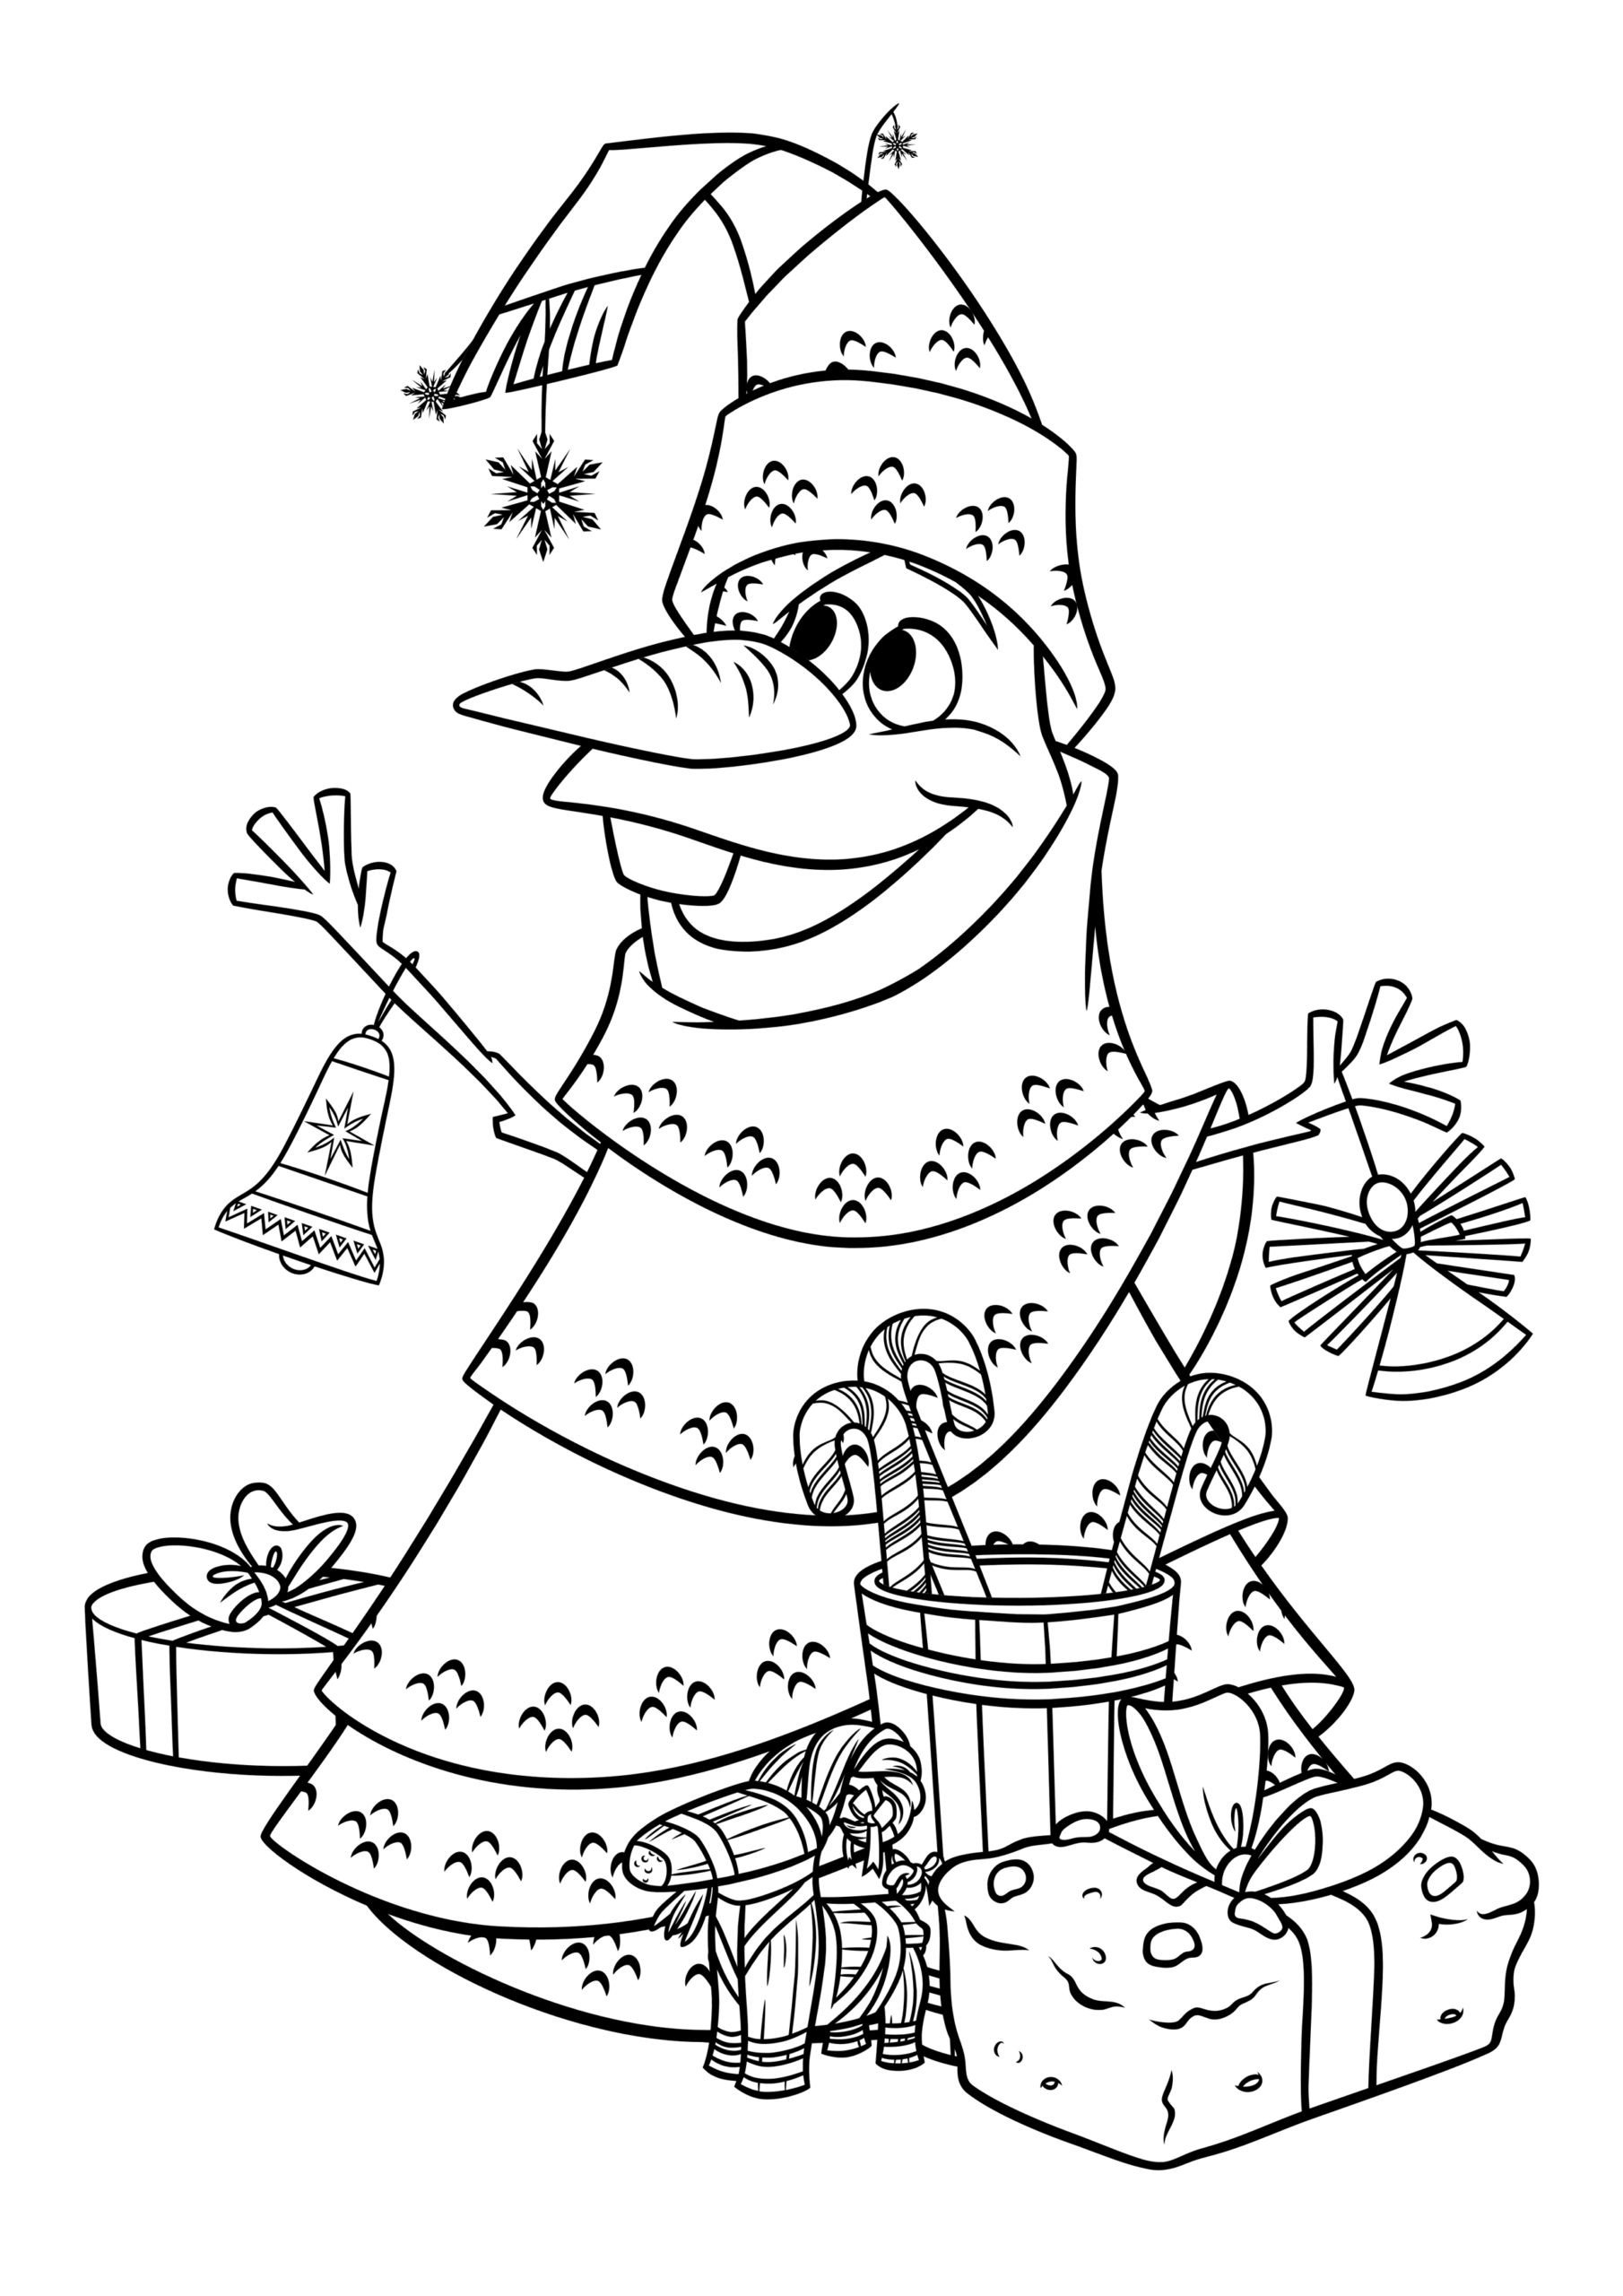 Disney christmas coloring pages